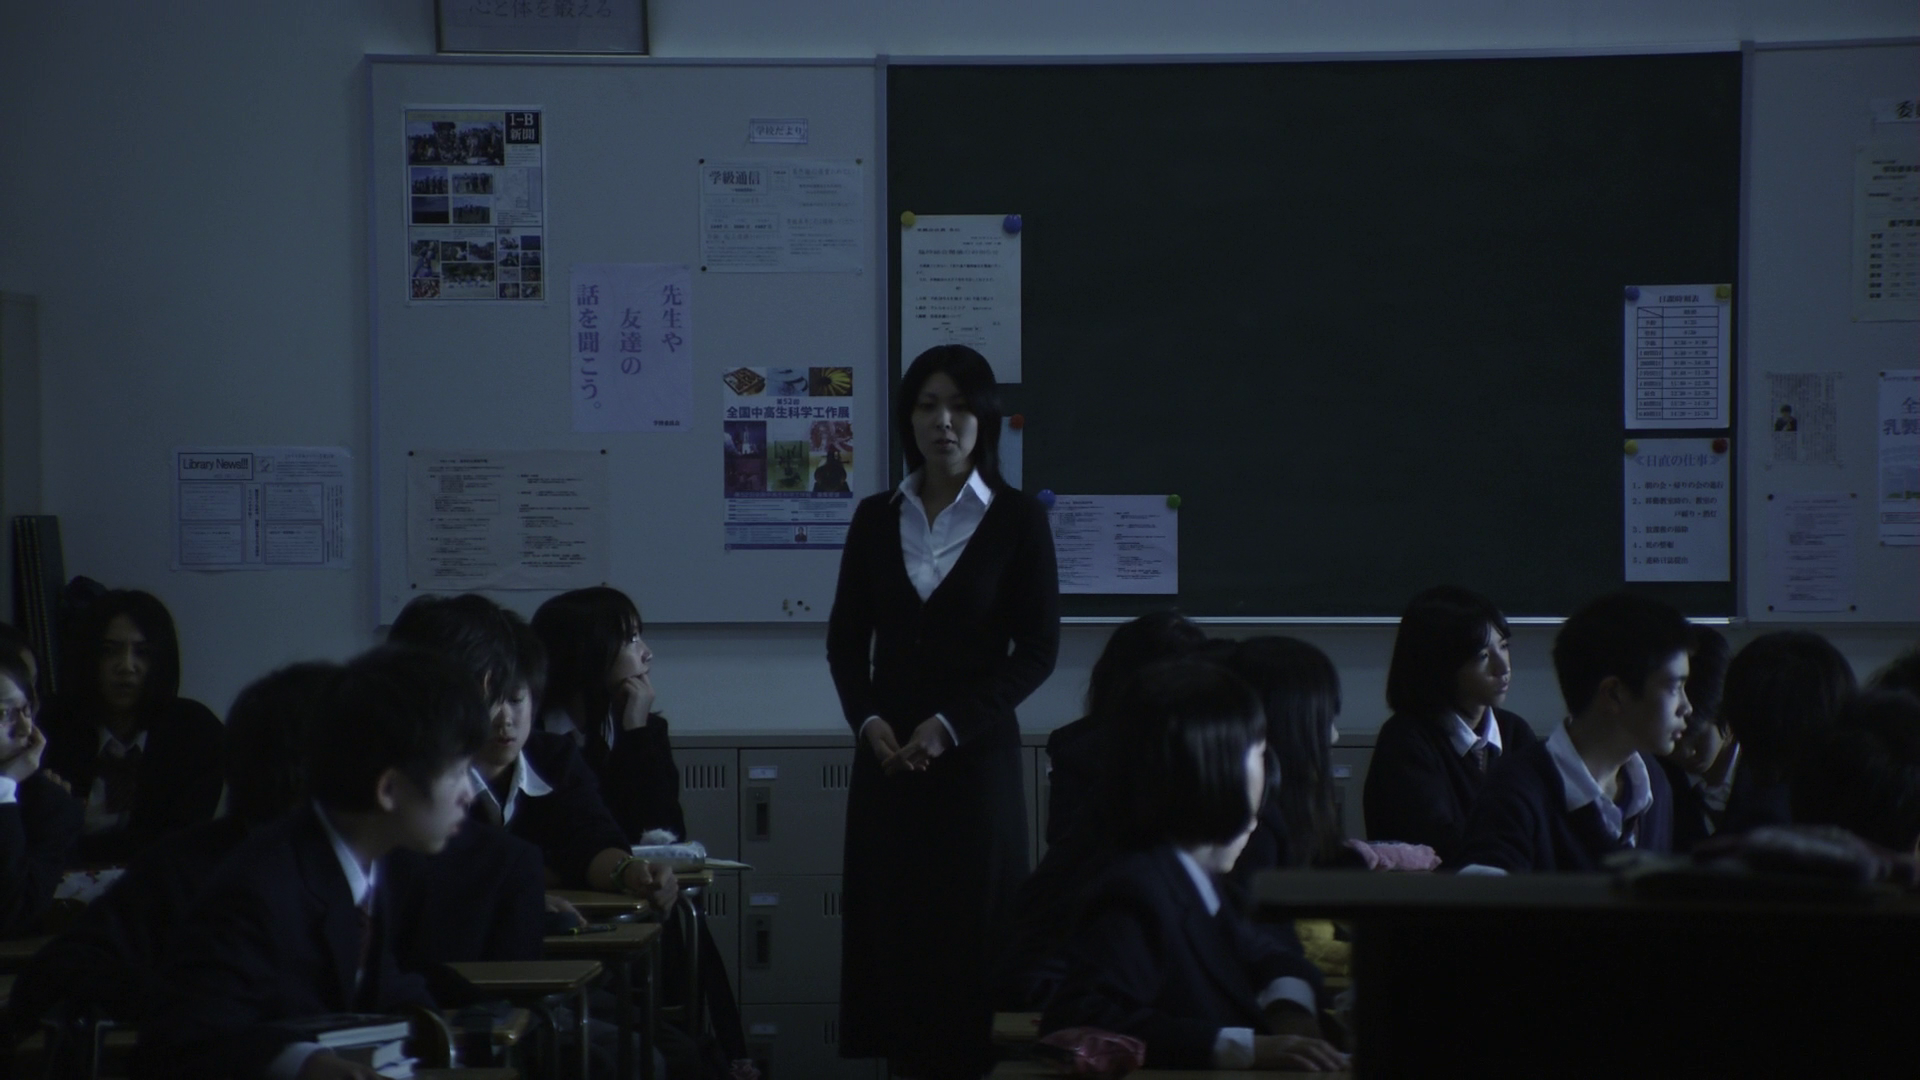  Confessions.2010.JAPANESE.1080p.BluRay.x264.DTS-FGT 8.69GB-5.png